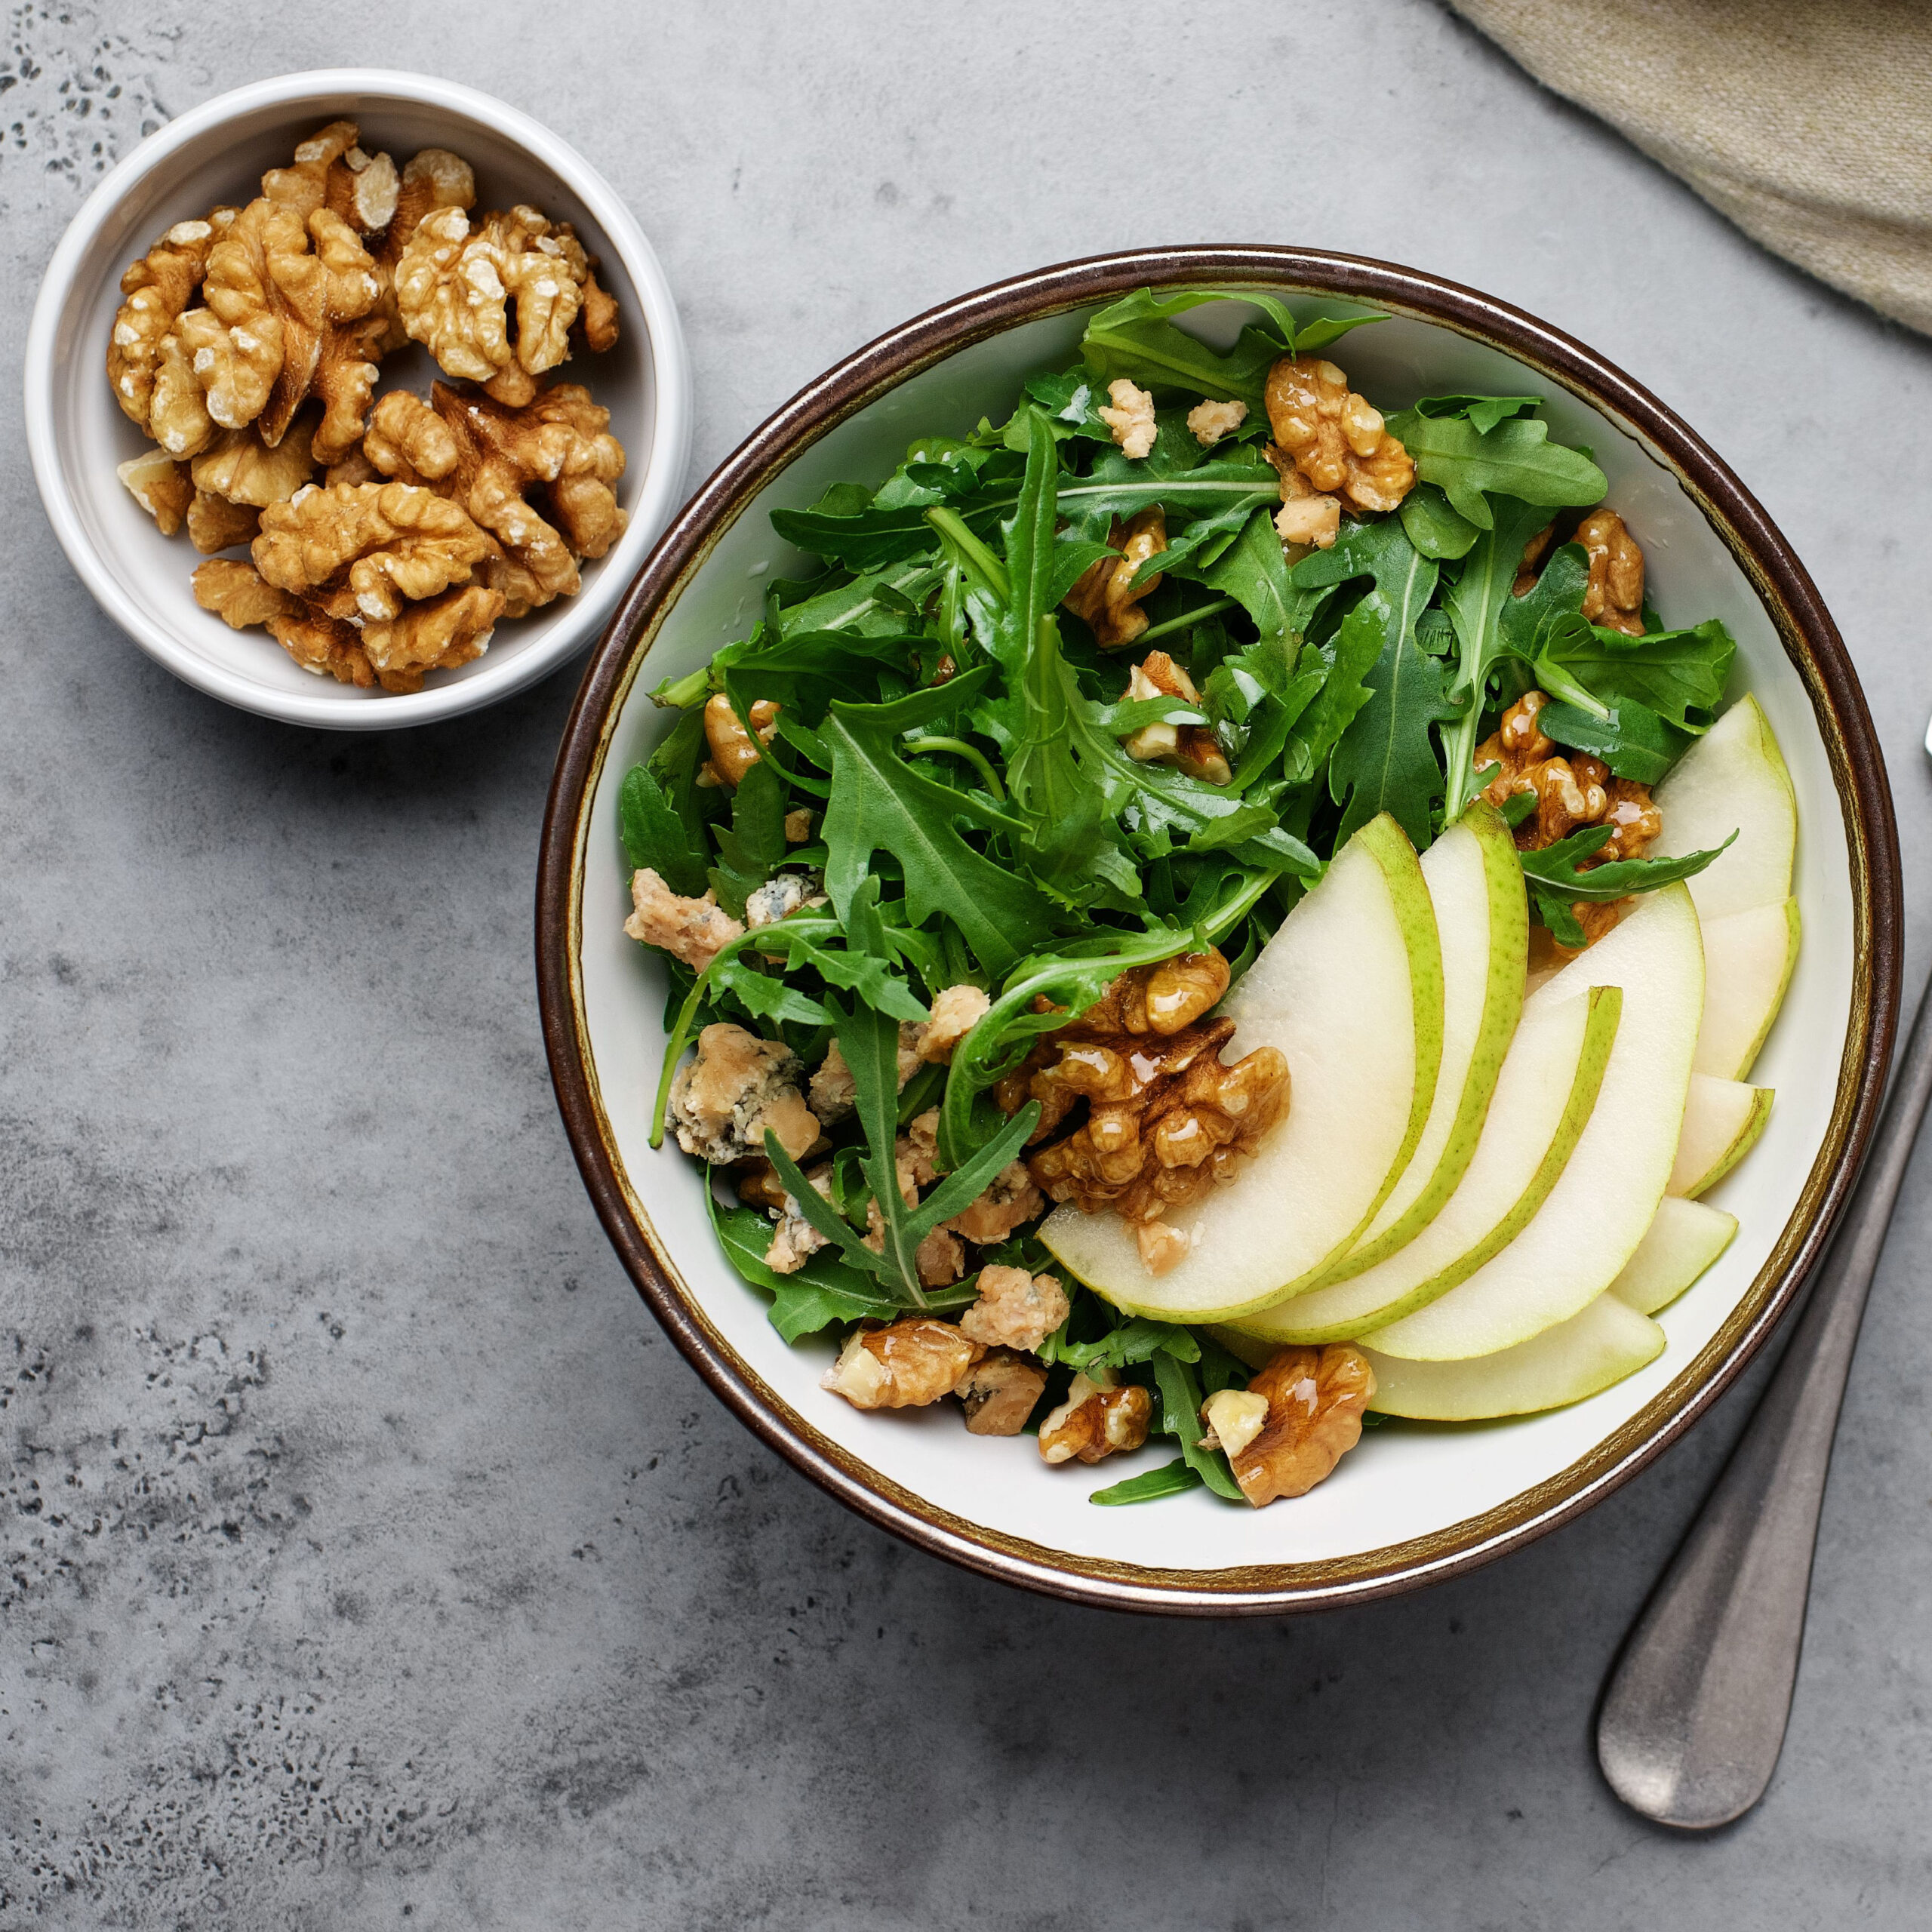 arugula salad topped with apples and nuts